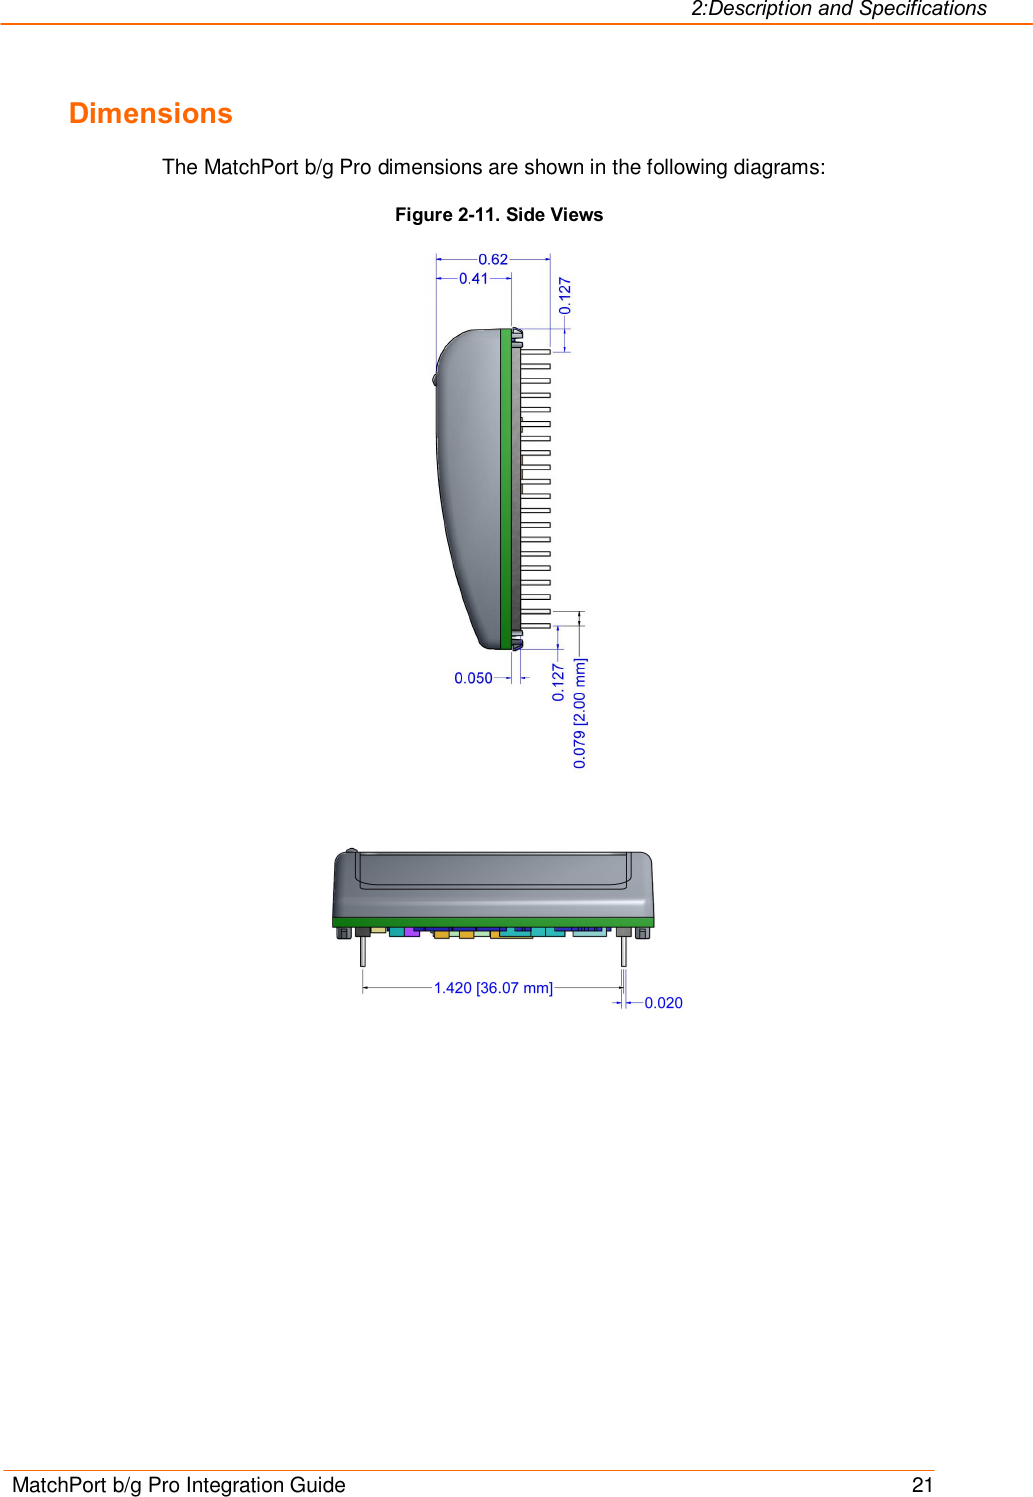 2:Description and Specifications MatchPort b/g Pro Integration Guide    21 Dimensions The MatchPort b/g Pro dimensions are shown in the following diagrams:  Figure 2-11. Side Views    